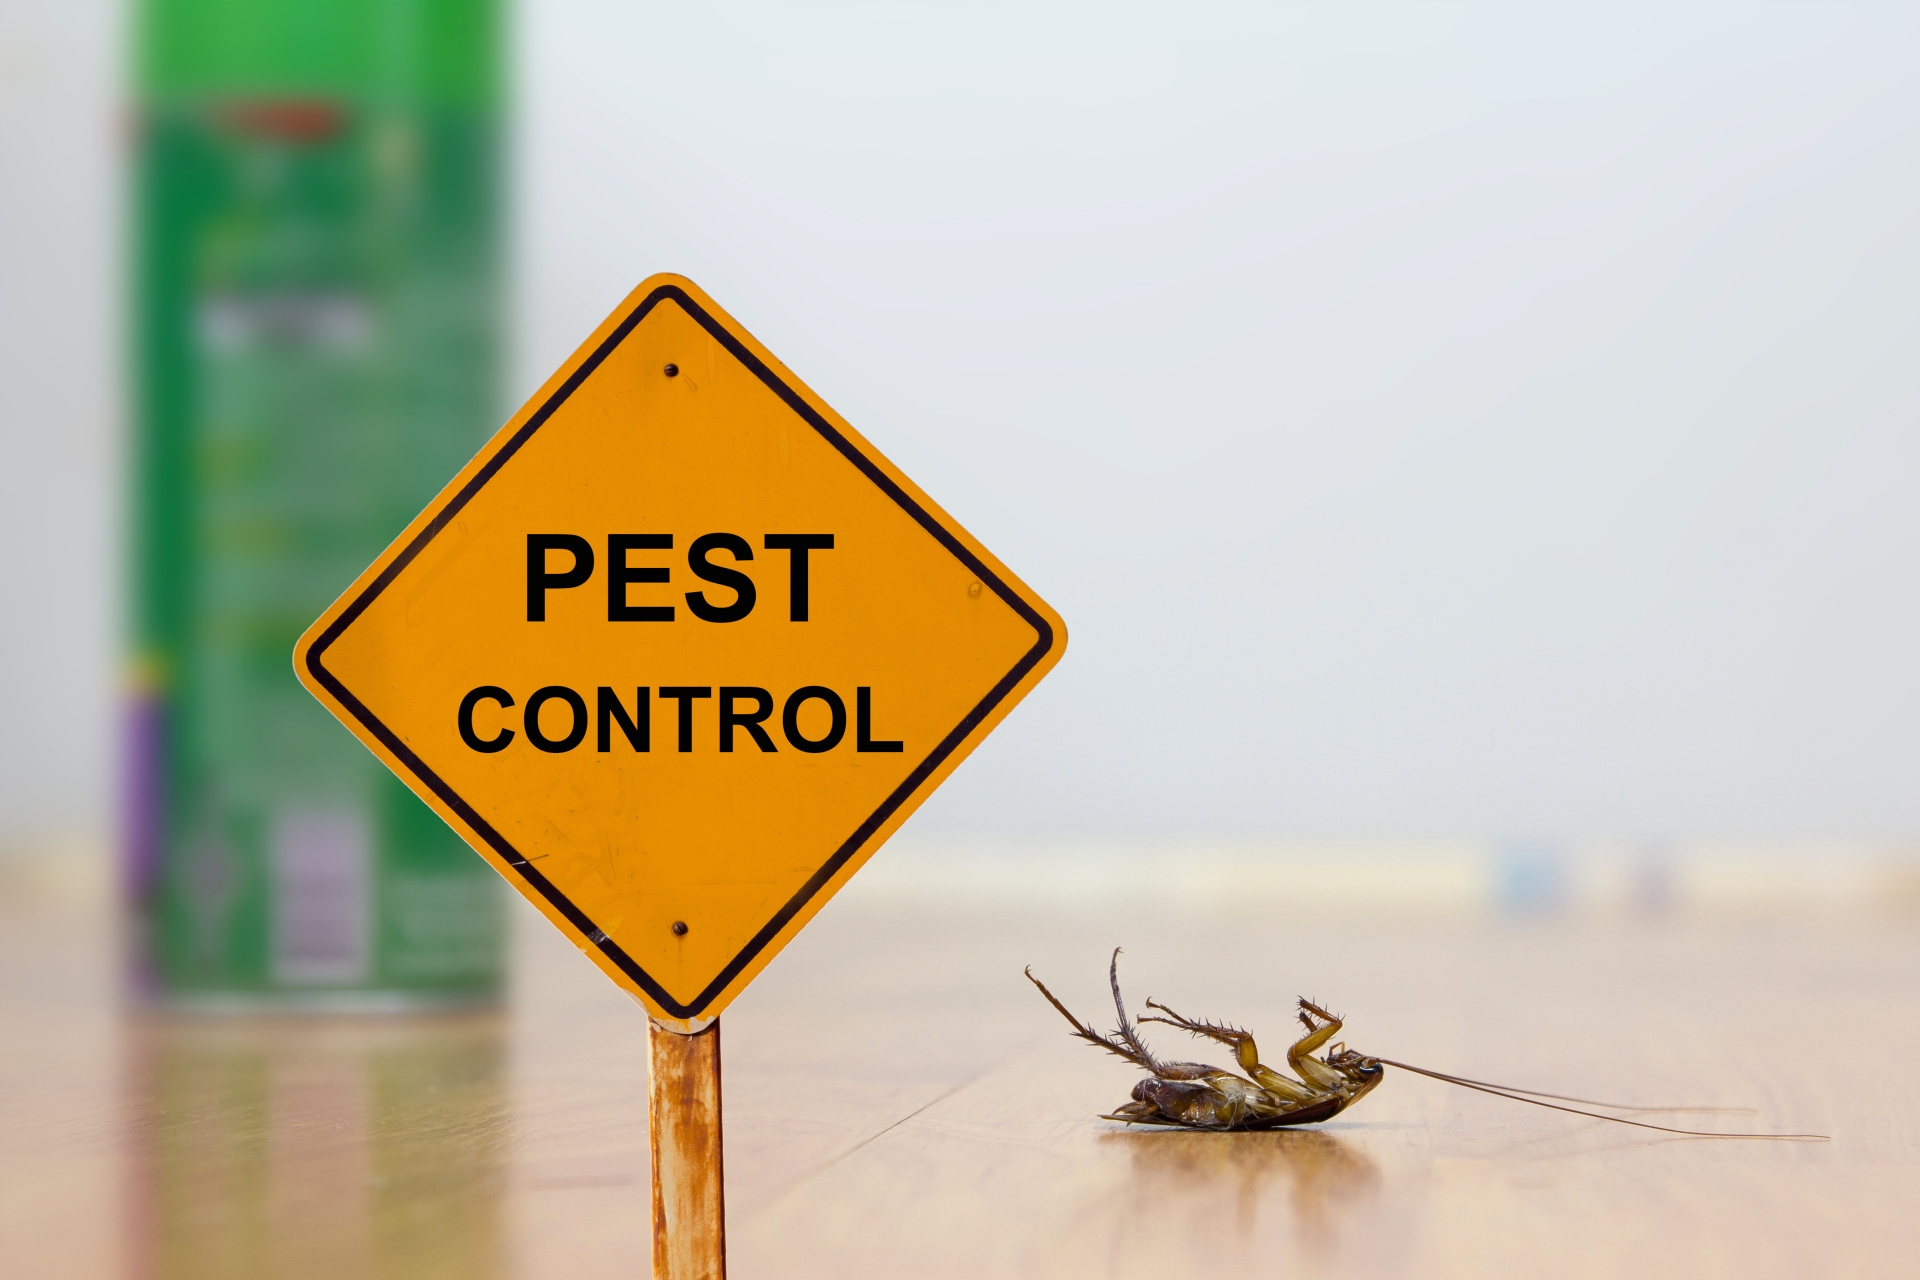 24 Hour Pest Control, Pest Control in Acton, W3. Call Now 020 8166 9746